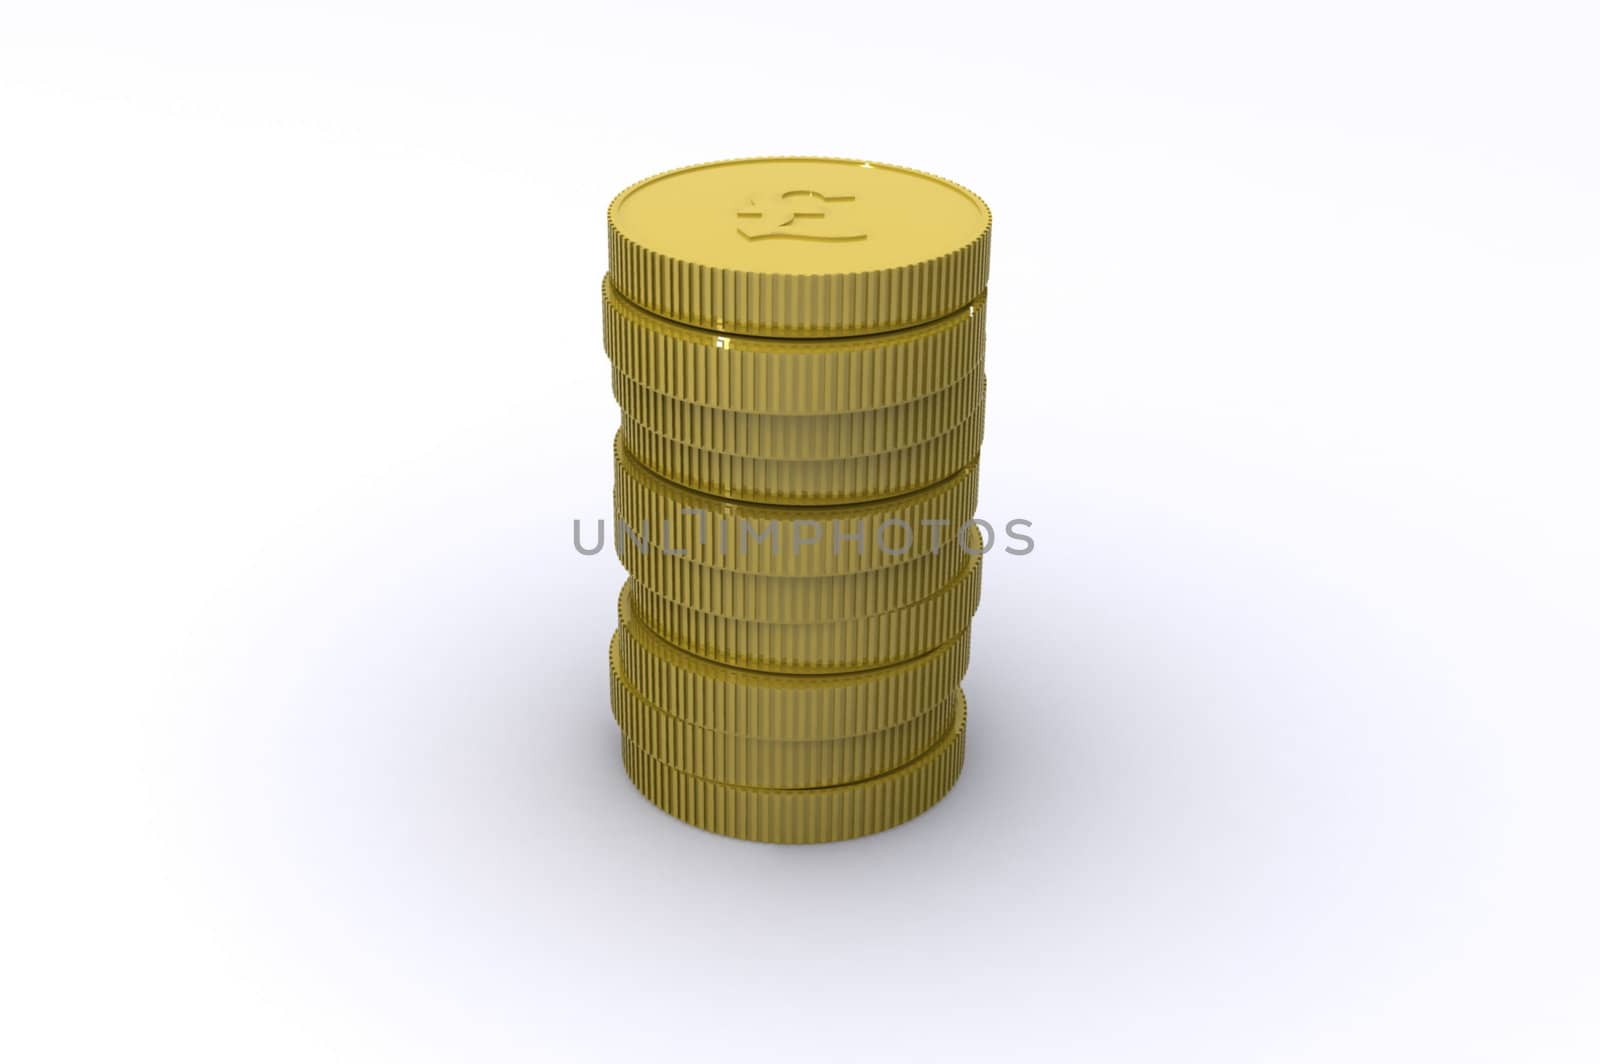 A Colourful 3d Rendered Stack of Pound Coins Illustration